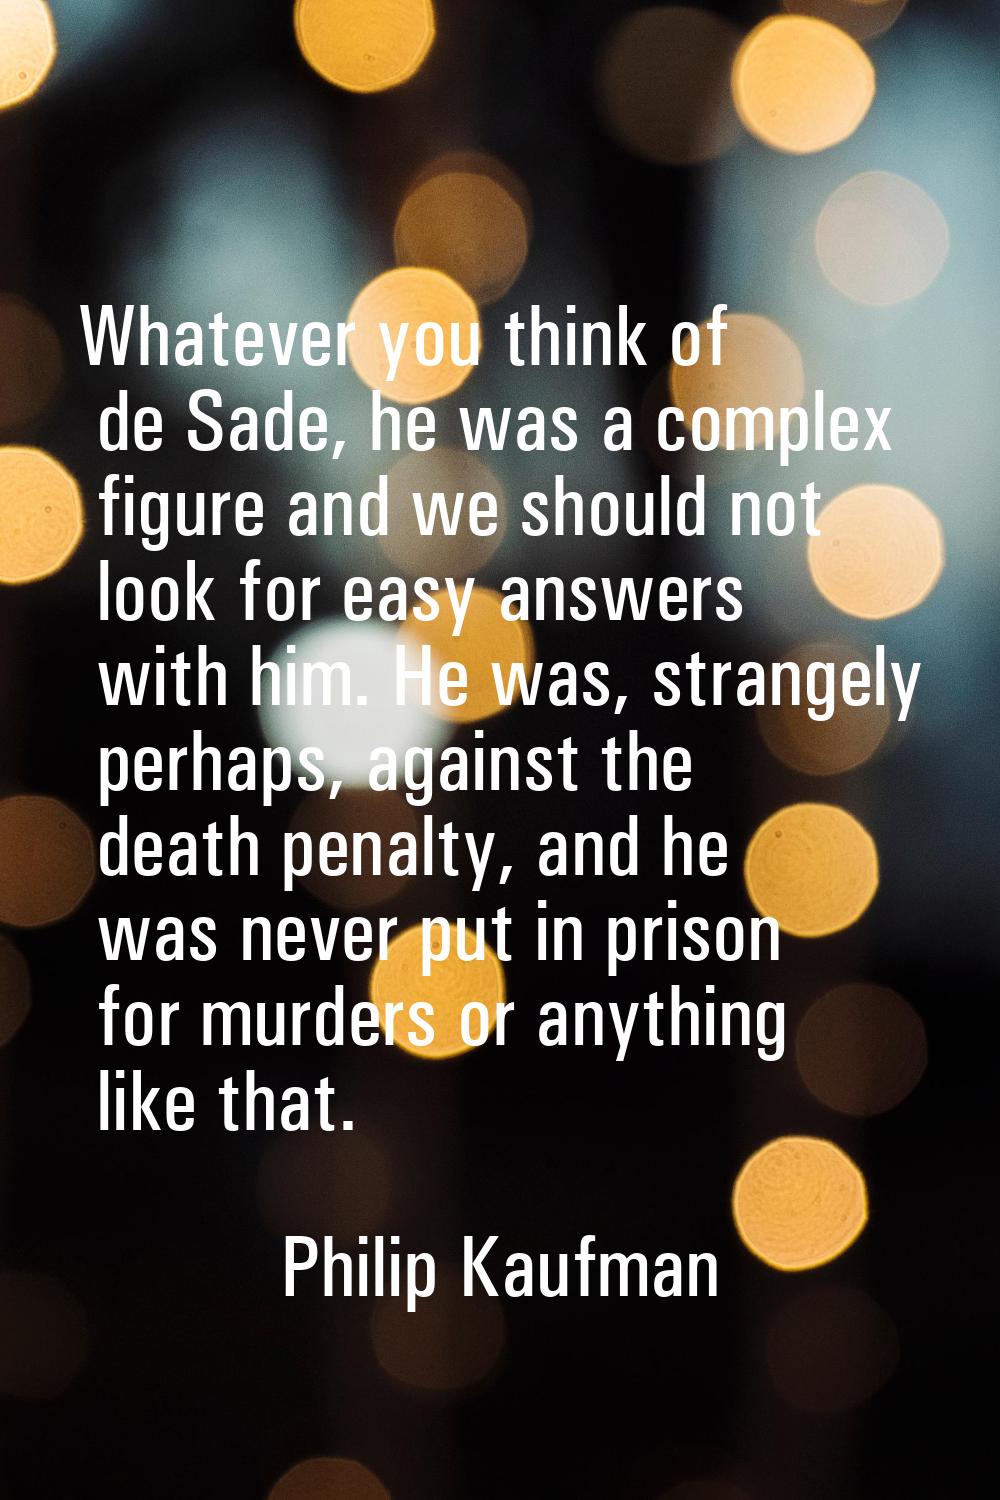 Whatever you think of de Sade, he was a complex figure and we should not look for easy answers with